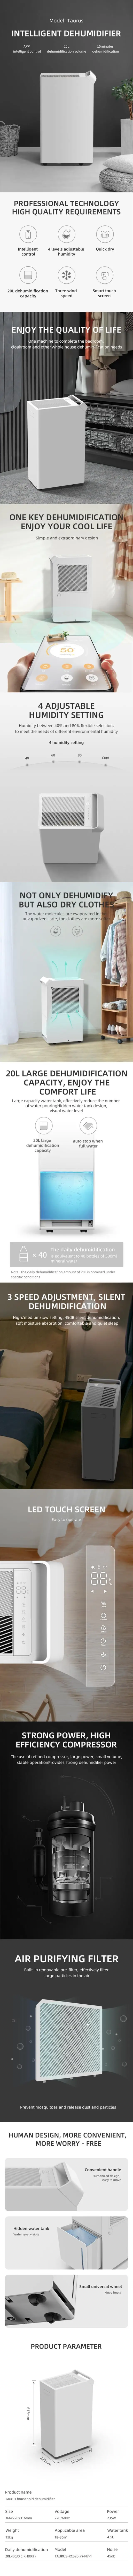 Portable Home Dehumidifiers With Competitive Price For Home Refrigerative Dehumidifier Washable Air Filter Free Spare Parts images - 6